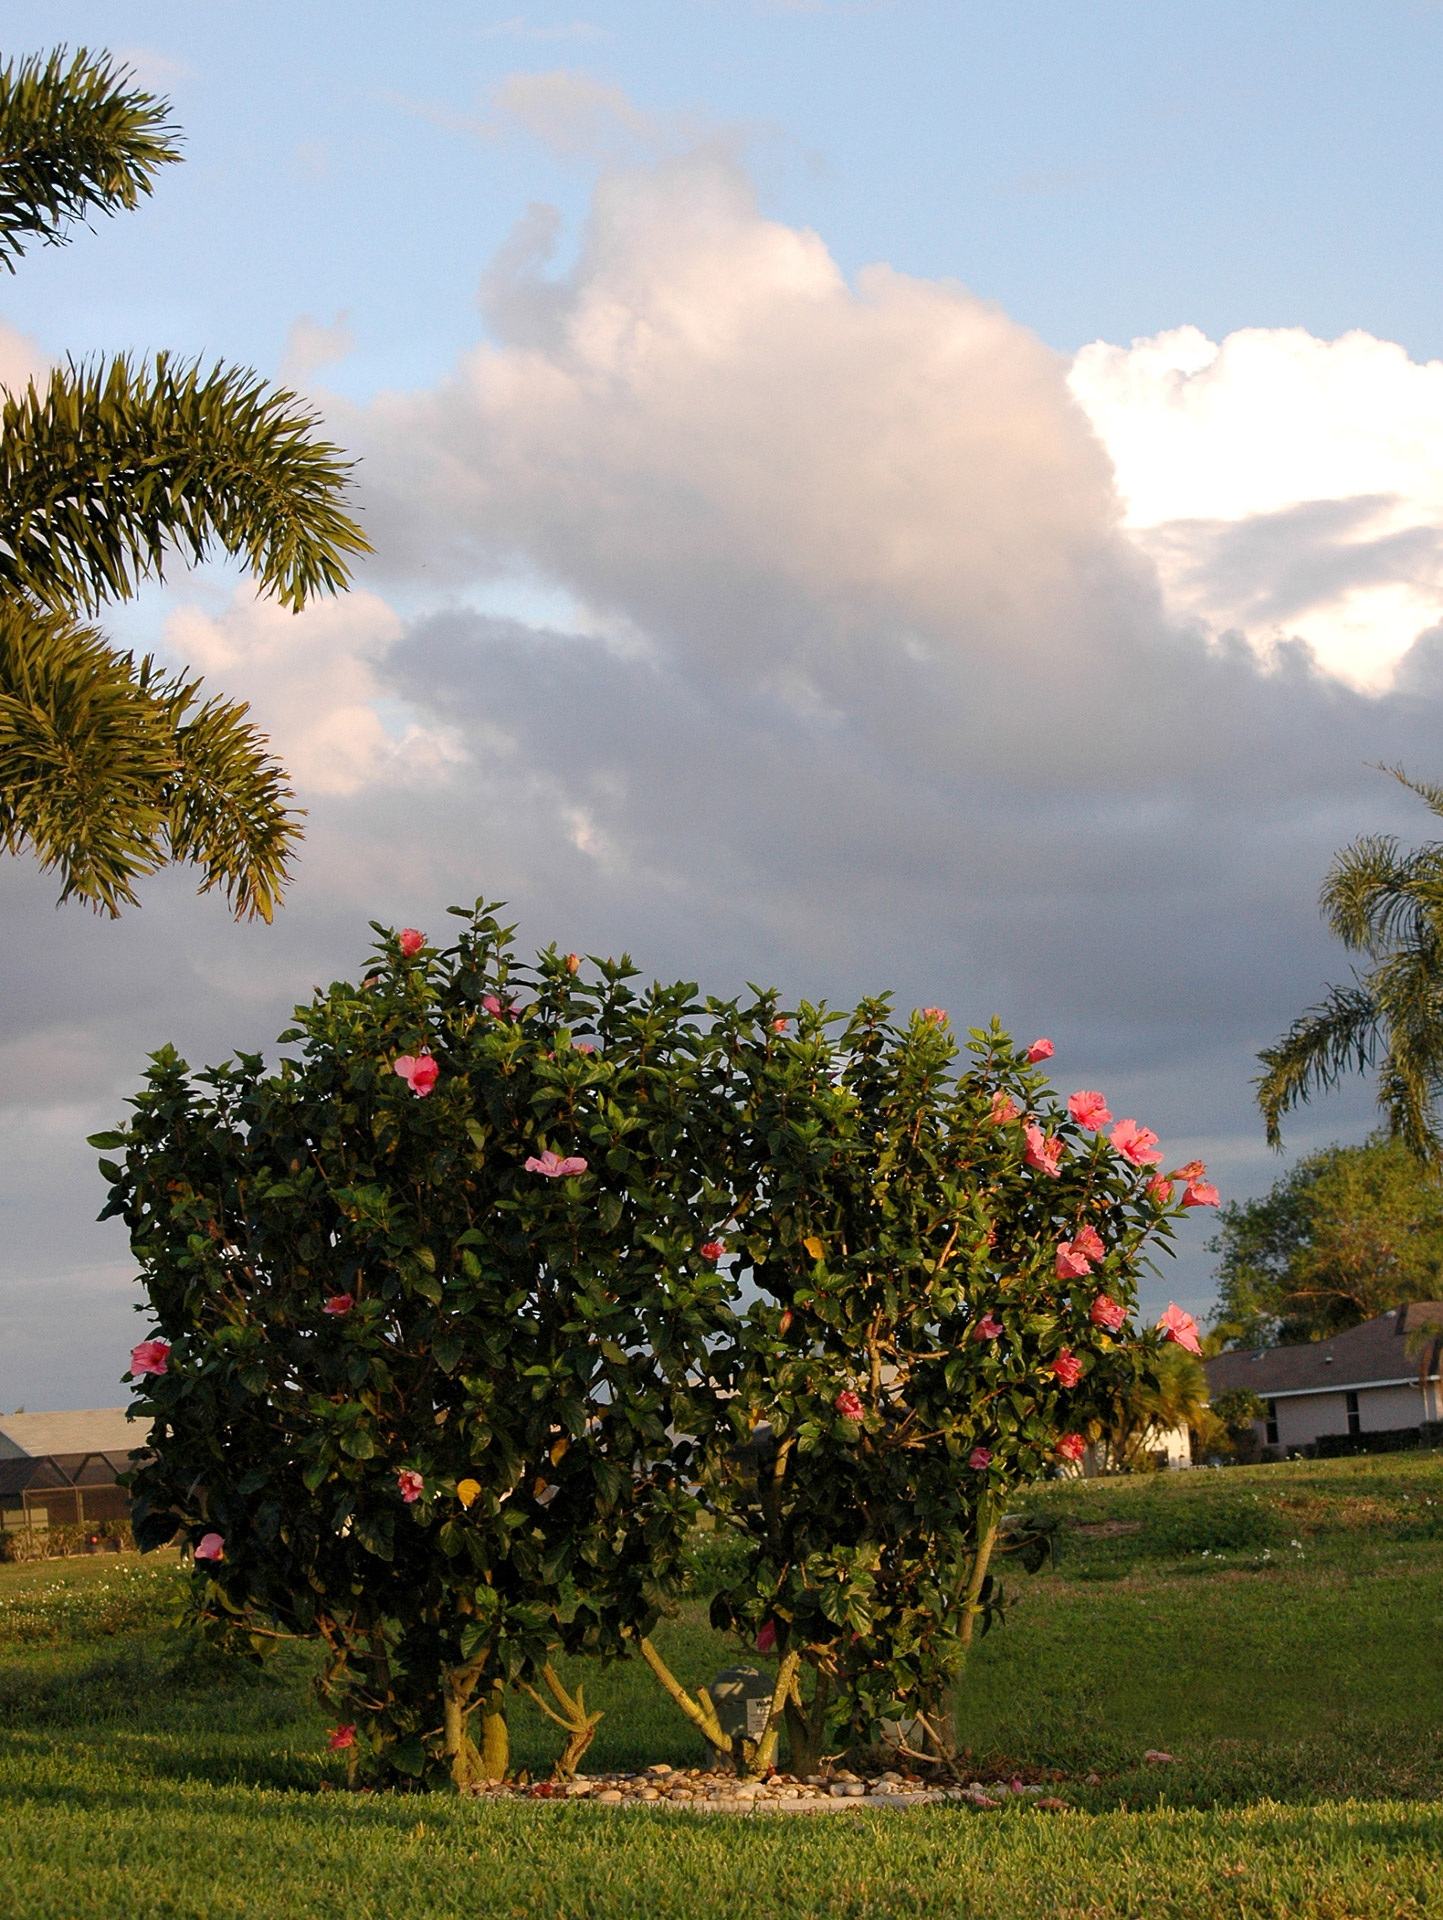 Hibiscus bushes and flowers at sunset. Photographed in Florida.